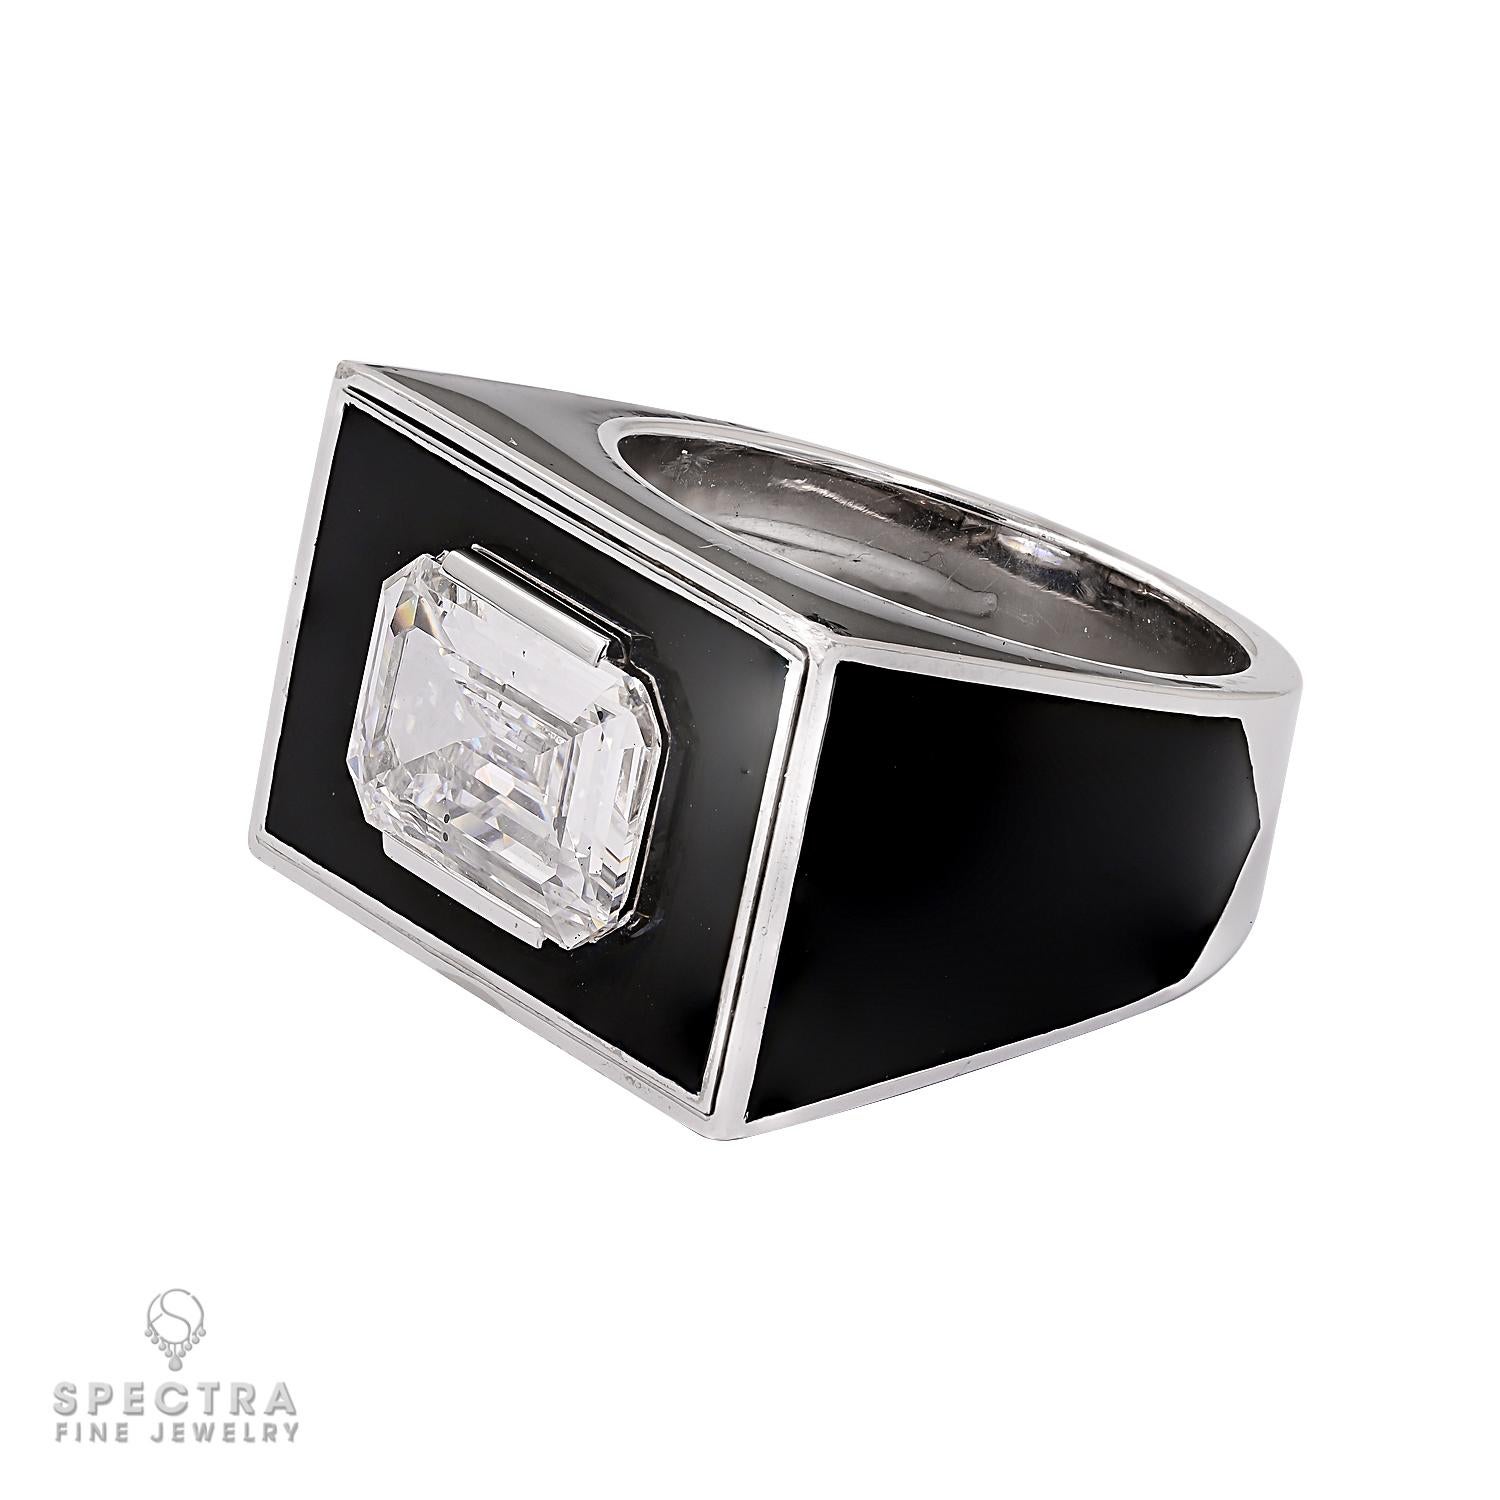 Introducing the epitome of elegance and sophistication, behold our exquisite cocktail ring featuring a mesmerizing emerald-cut diamond, weighing a remarkable 2.05 carats. This timeless treasure takes center stage, captivating all with its flawless